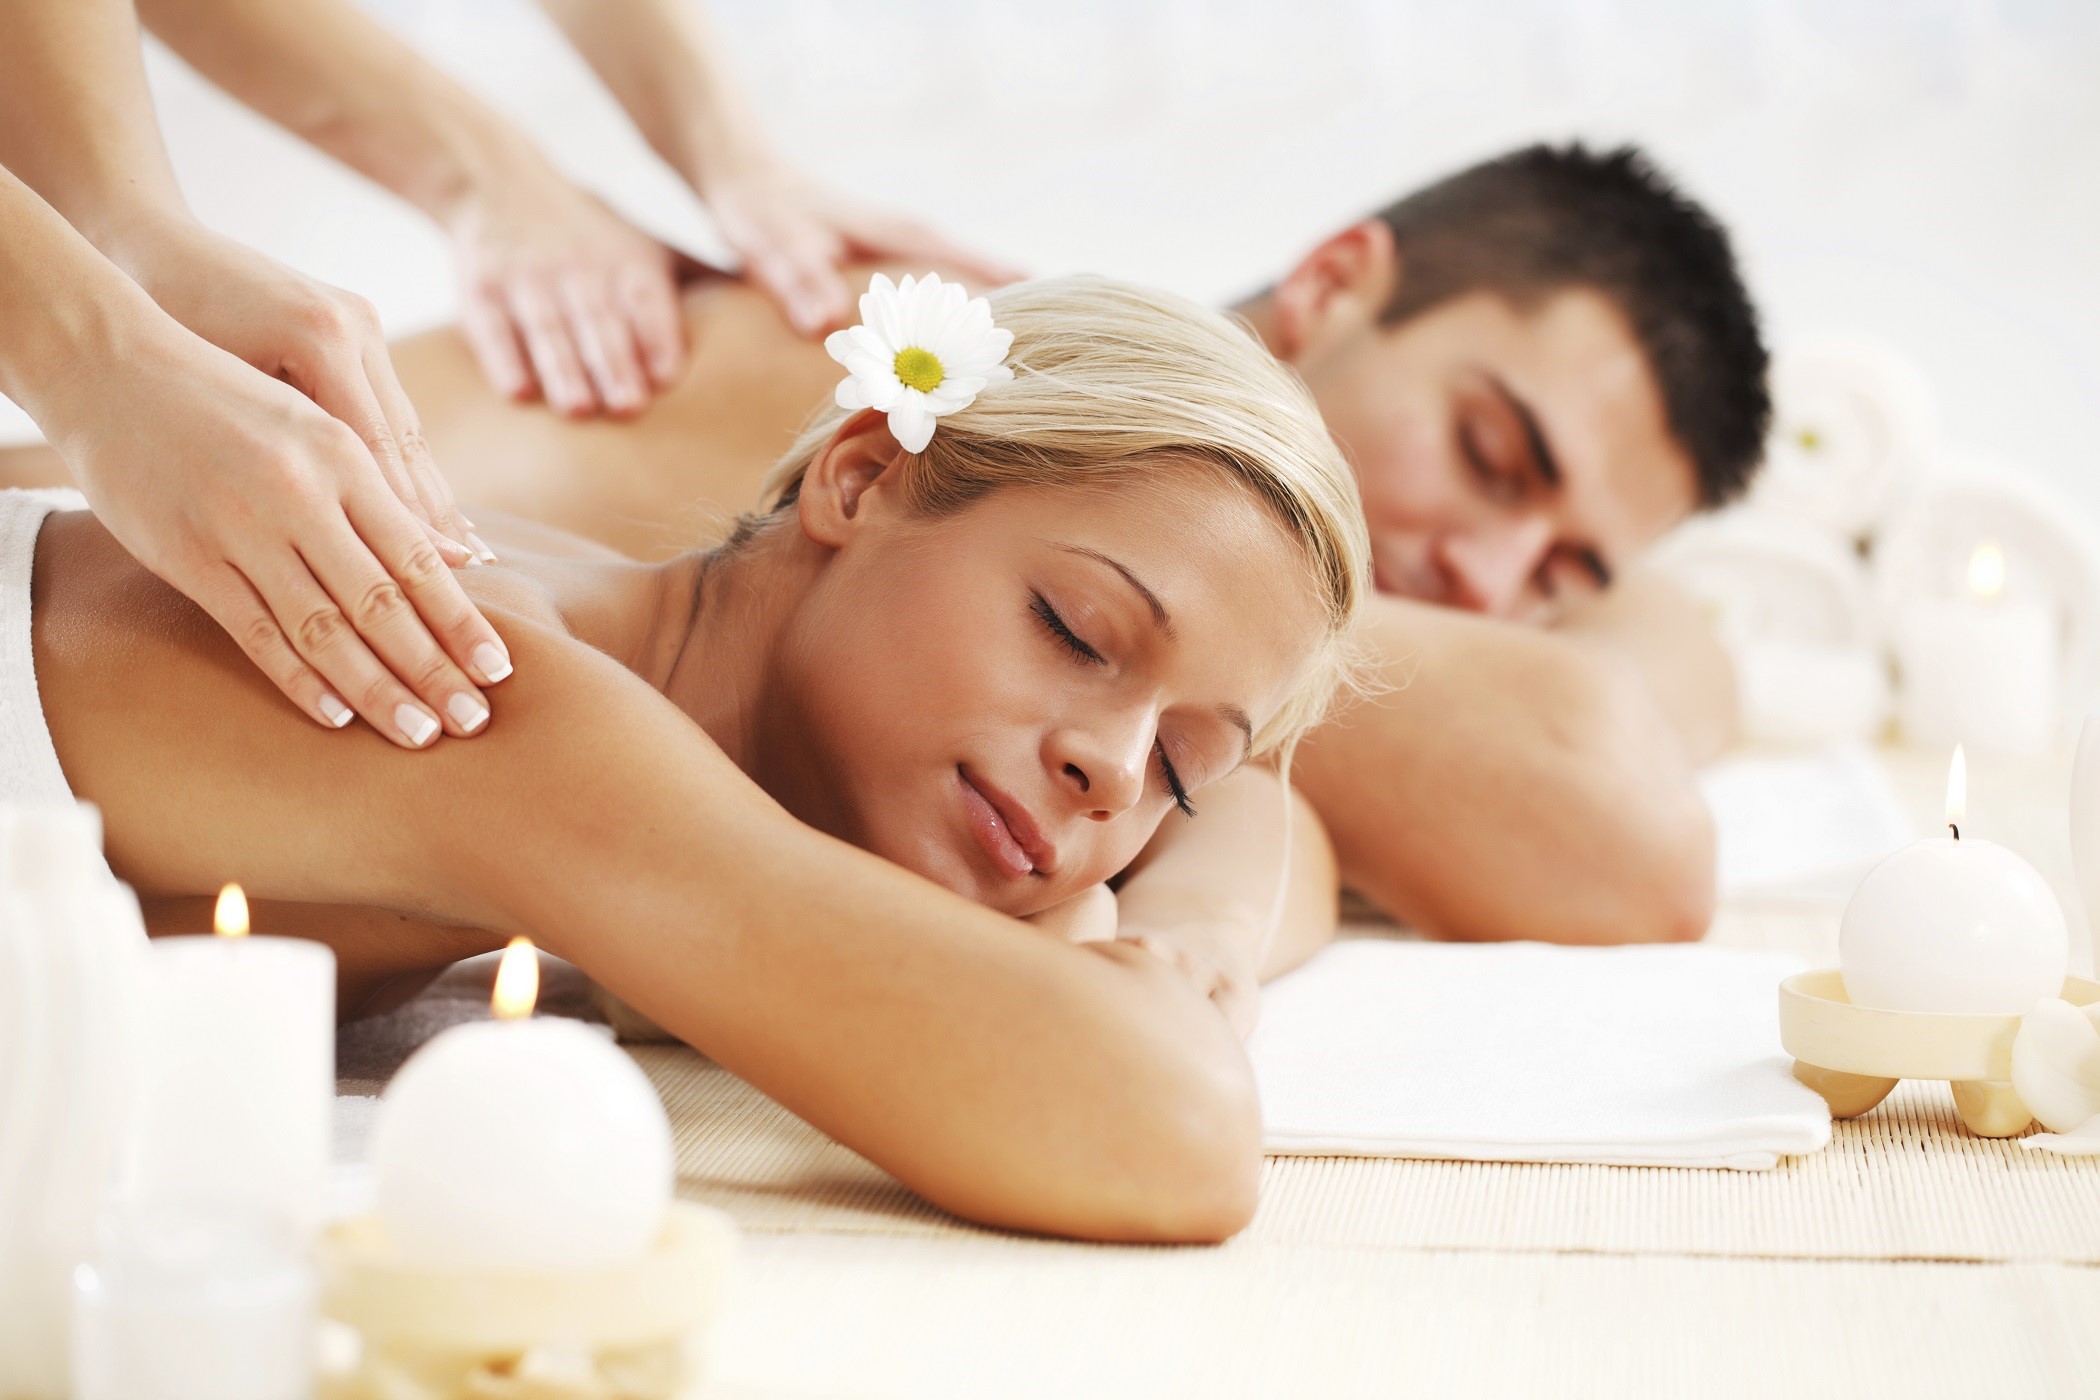 Young couple is having a back massage at the spa centre. 

[url=http://www.istockphoto.com/search/lightbox/9786786][img]http://dl.dropbox.com/u/40117171/couples.jpg[/img][/url]